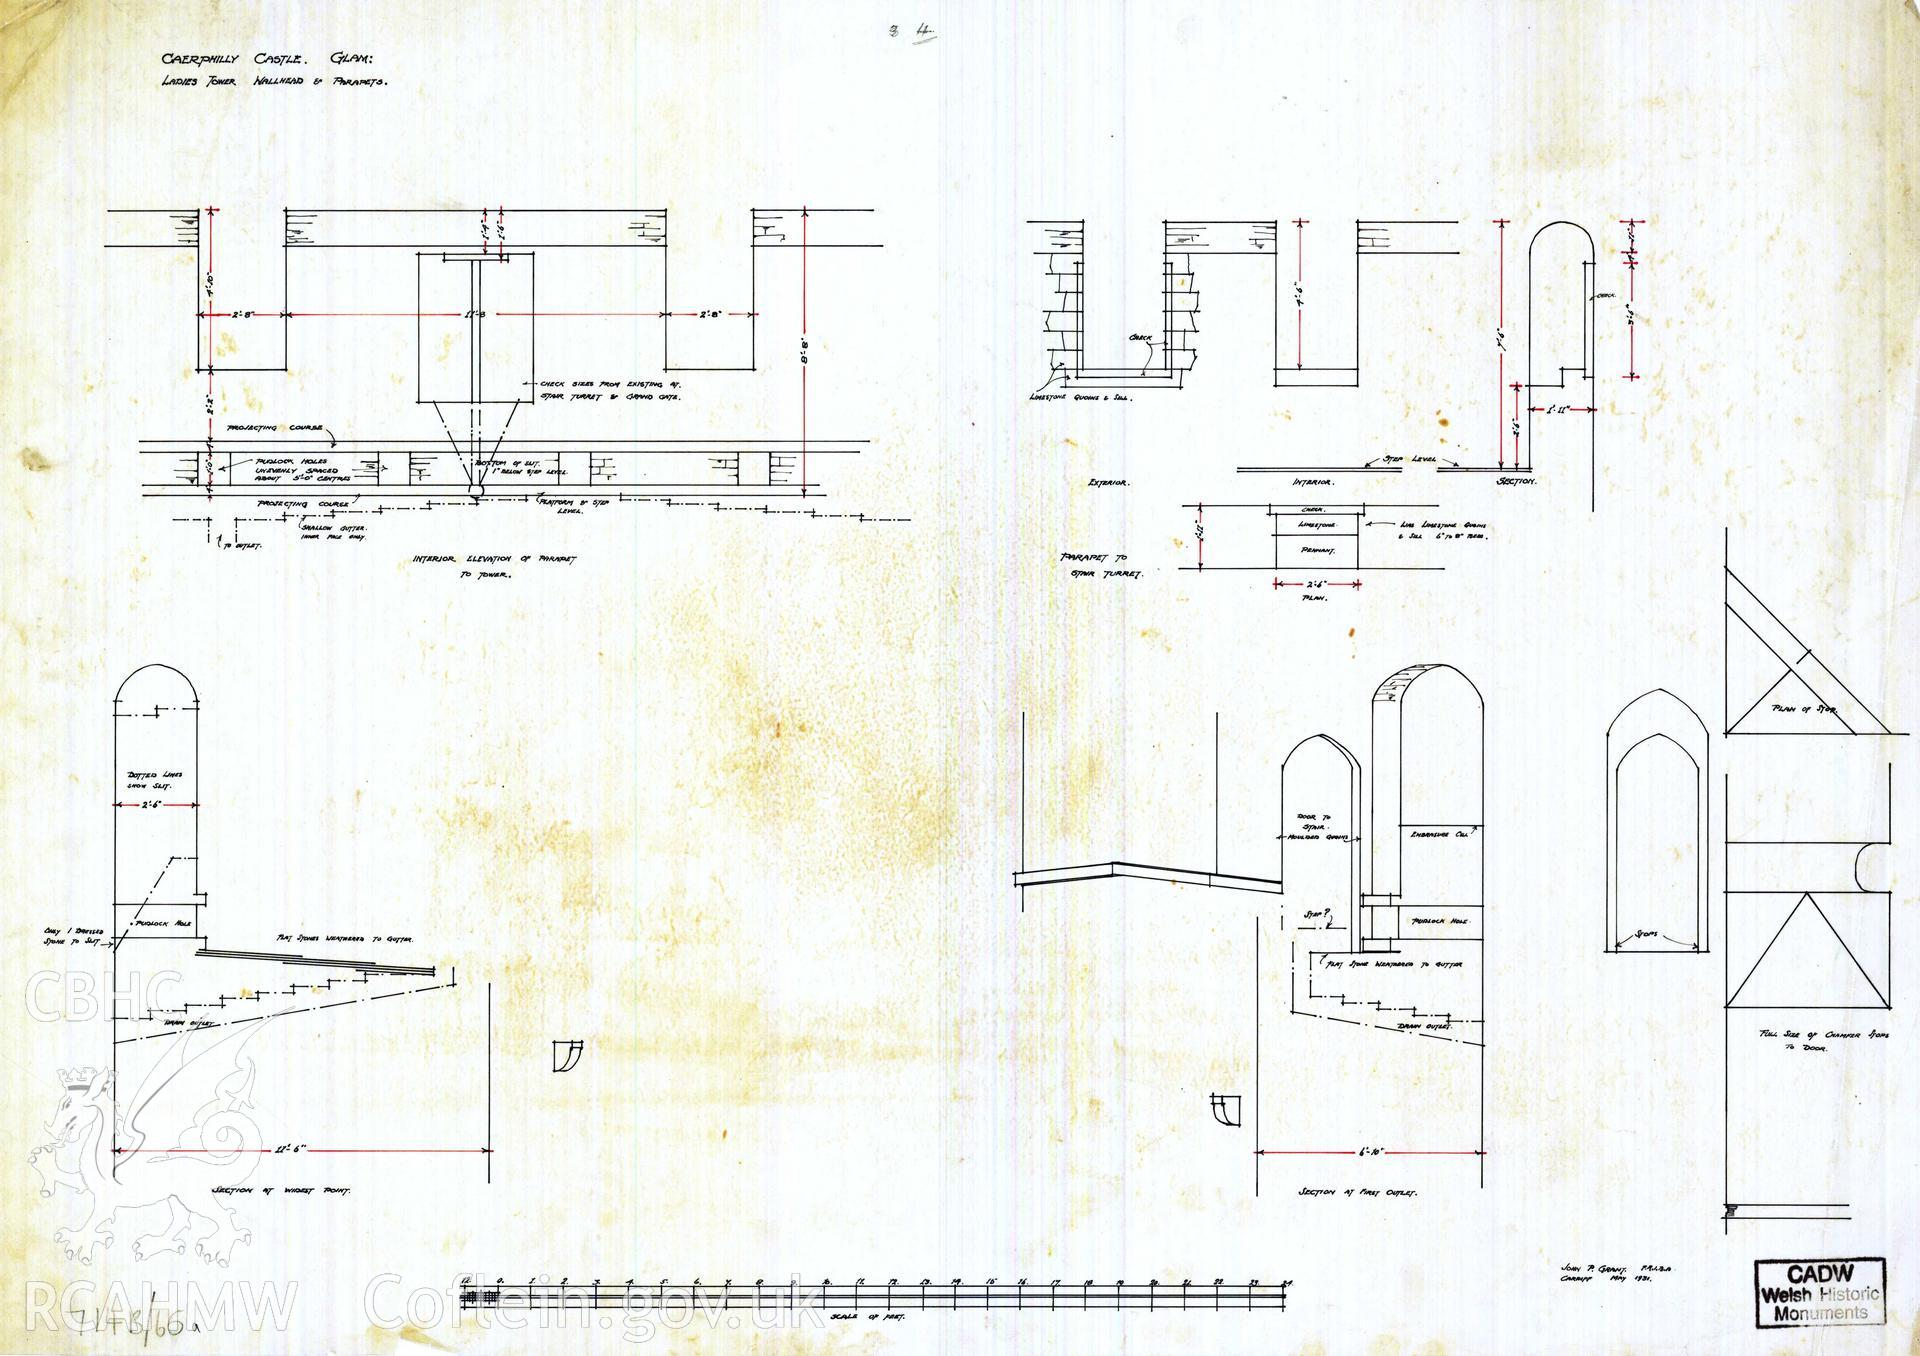 Digital copy of Cadw guardianship monument drawing of Caerphilly Castle. Finial Ladies Tower. Cadw ref. no. 714B/65. Scale 1:1. Hard-copy drawing withdrawn and returned to Cadw at their request.